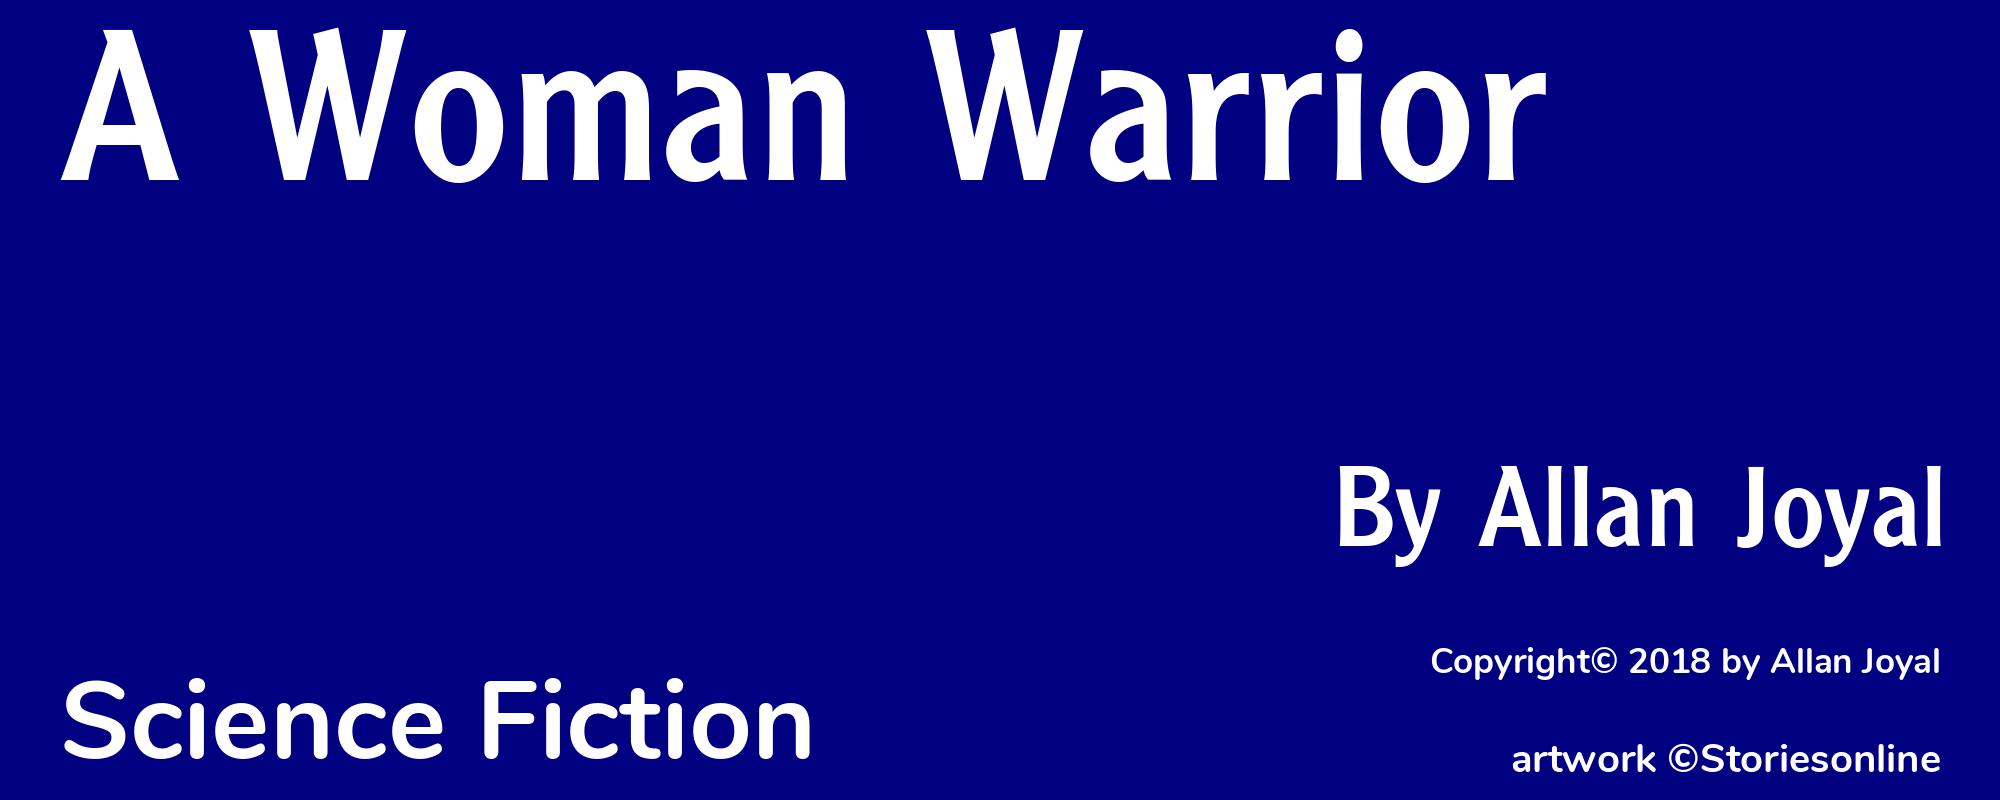 A Woman Warrior - Cover